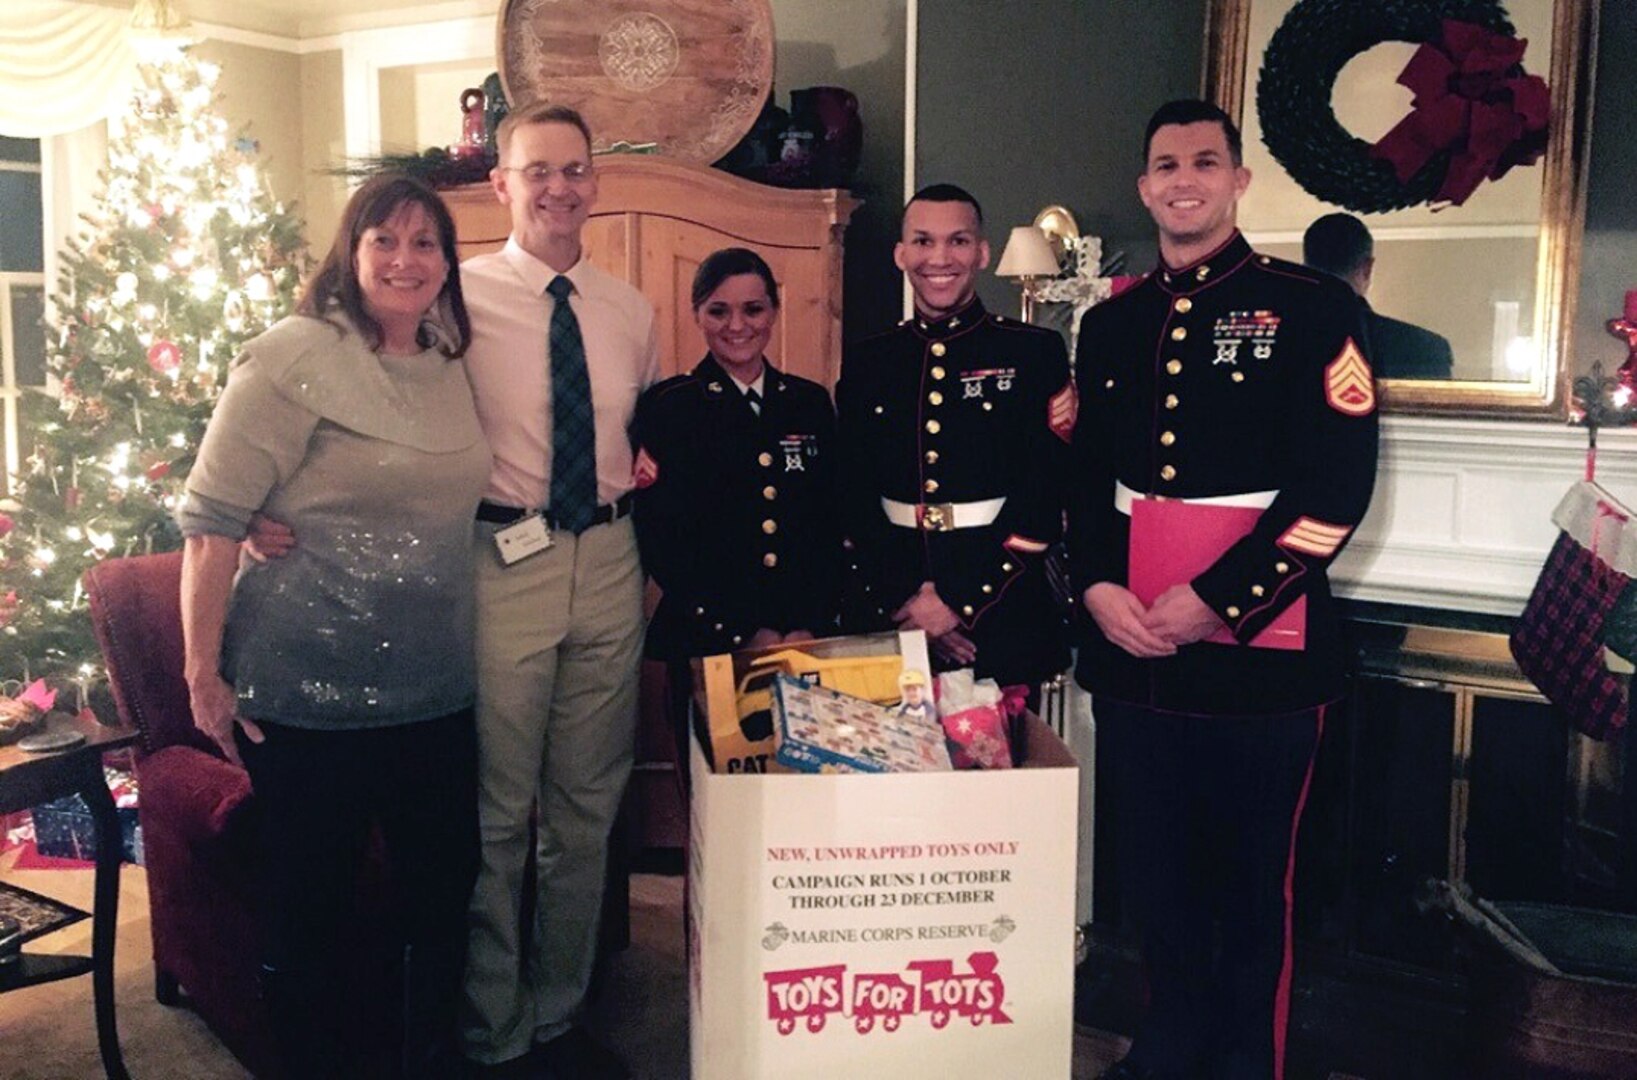 Toys for Tots donations are collected by, from left to right, Laura McLeod, Air Force Brig. Gen. Mark McLeod, Marine Cpl. Chelsea Propes, Marine Sgt. Robert Bradley and Marine Staff Sgt. Andrew Eichelberger. Defense Logistics Agency Energy employees contributed more than 150 toys during the DLA Energy commander’s holiday reception at Fort Belvoir, Virginia, Dec. 19. Photo by Army Capt. Keith De Silva